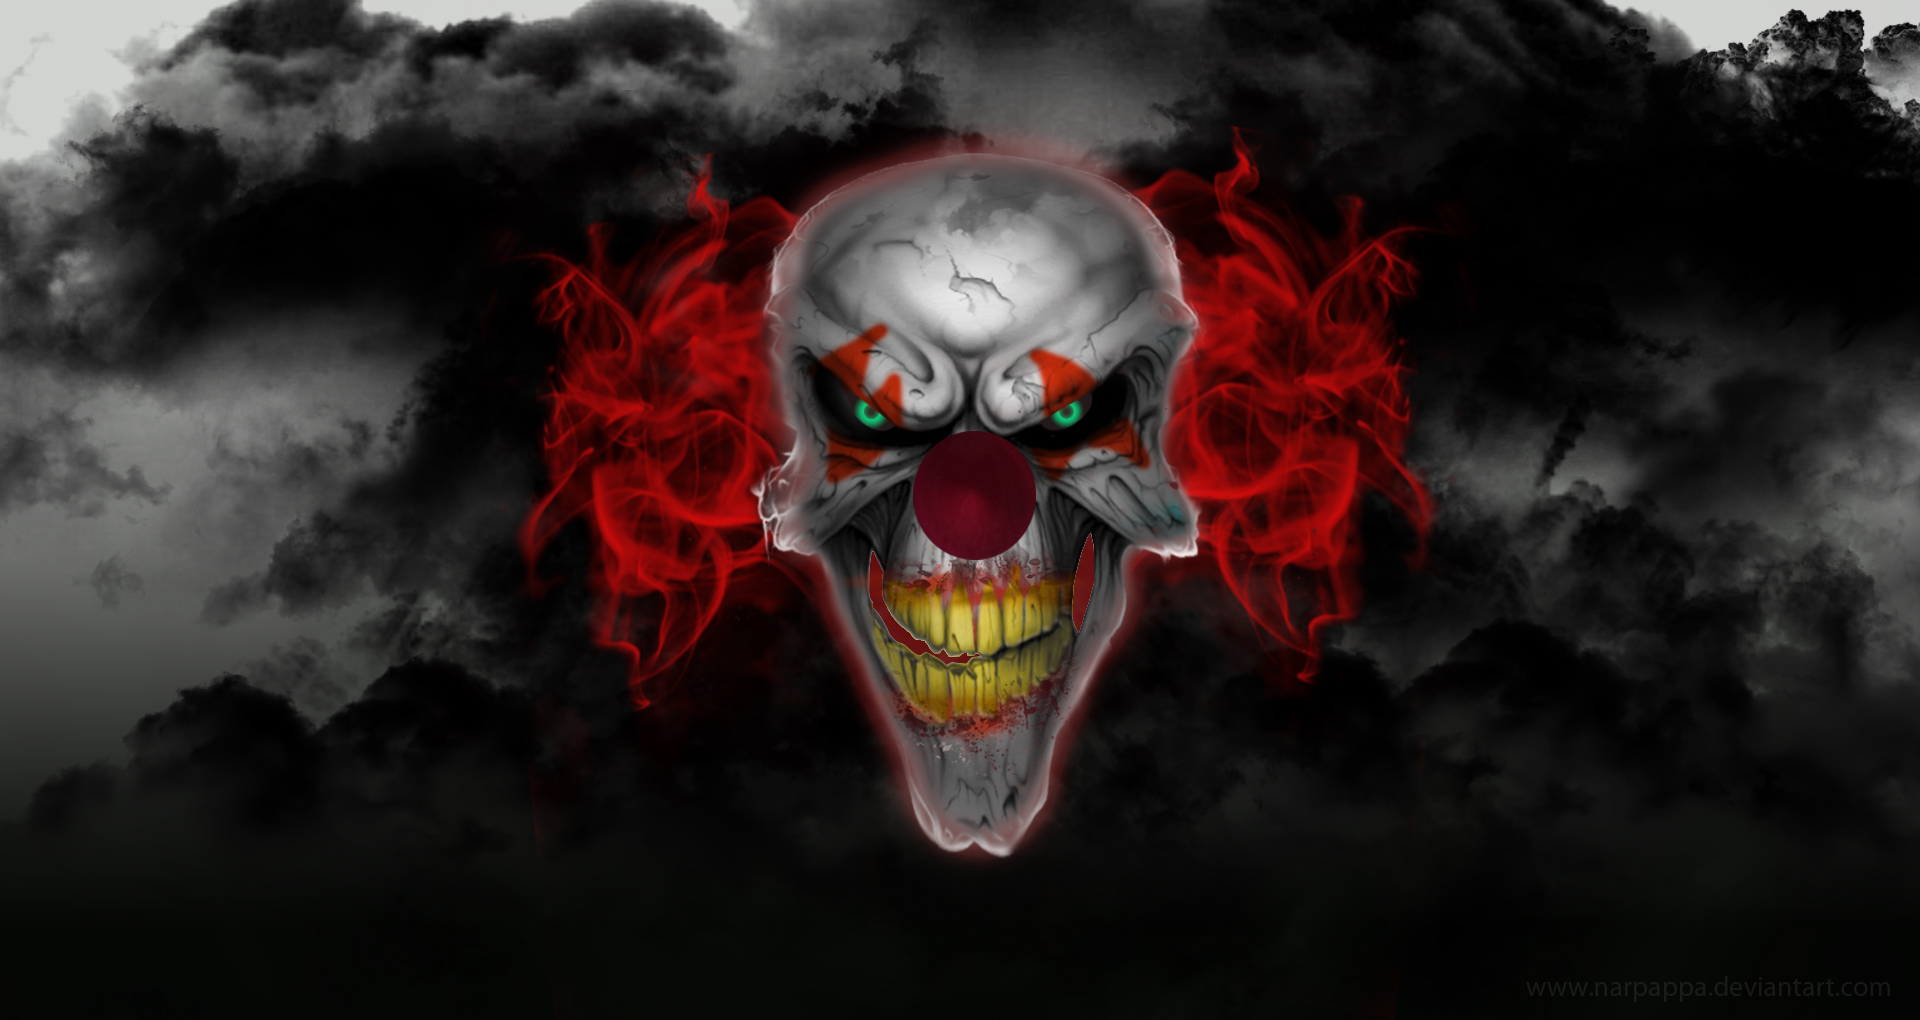 Group Of Scary Clown With Red Hair Wallpaper From Clowns